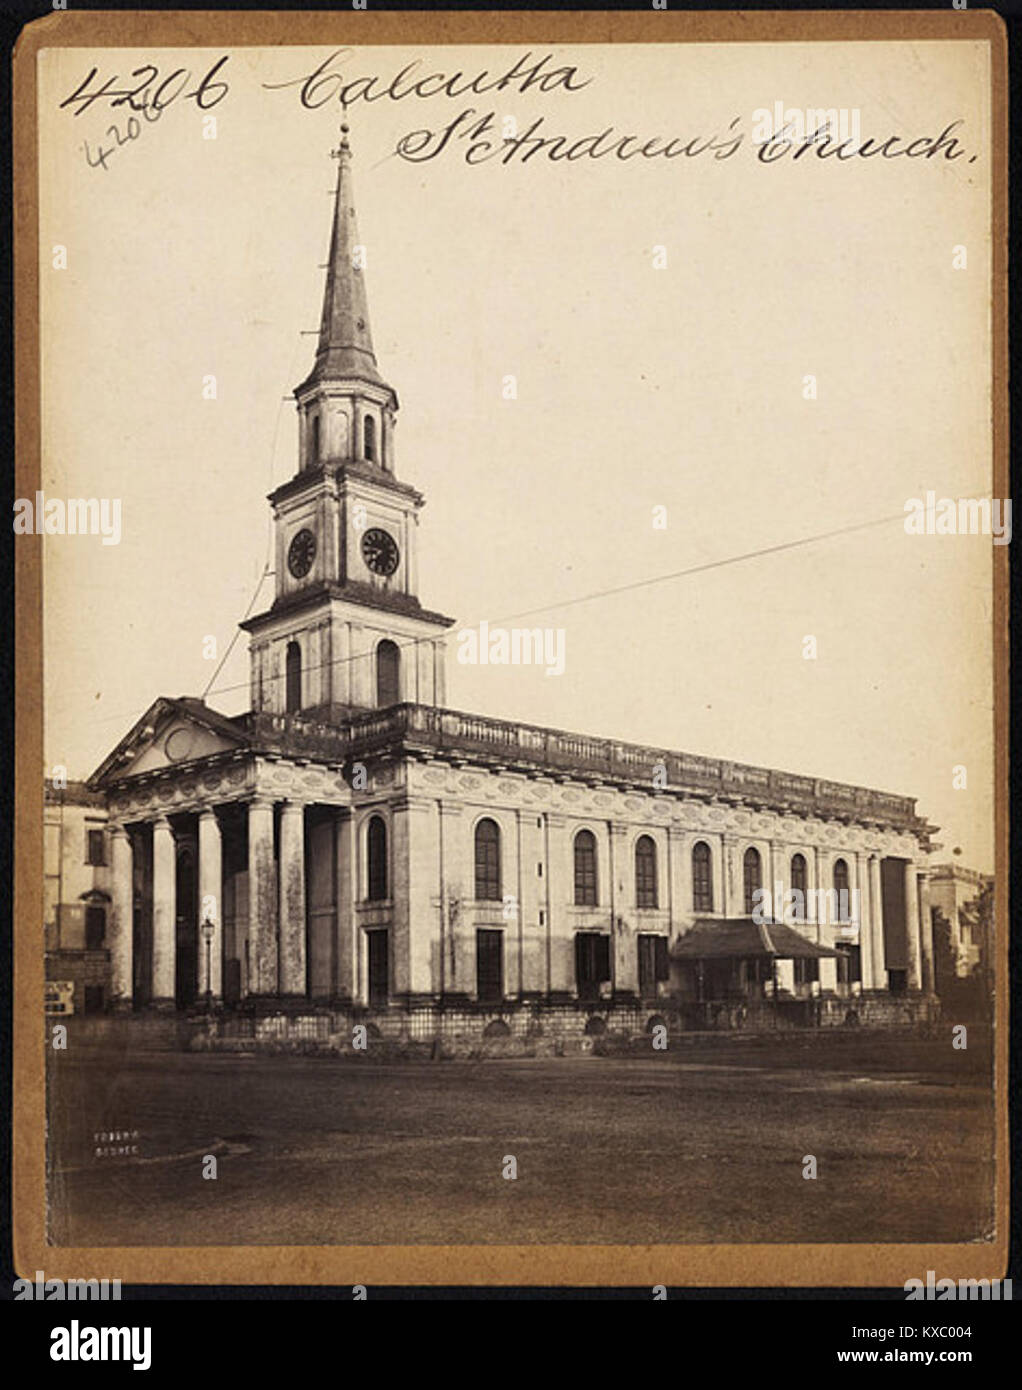 St. Andrew's Church, Calcutta by Francis Frith Stock Photo